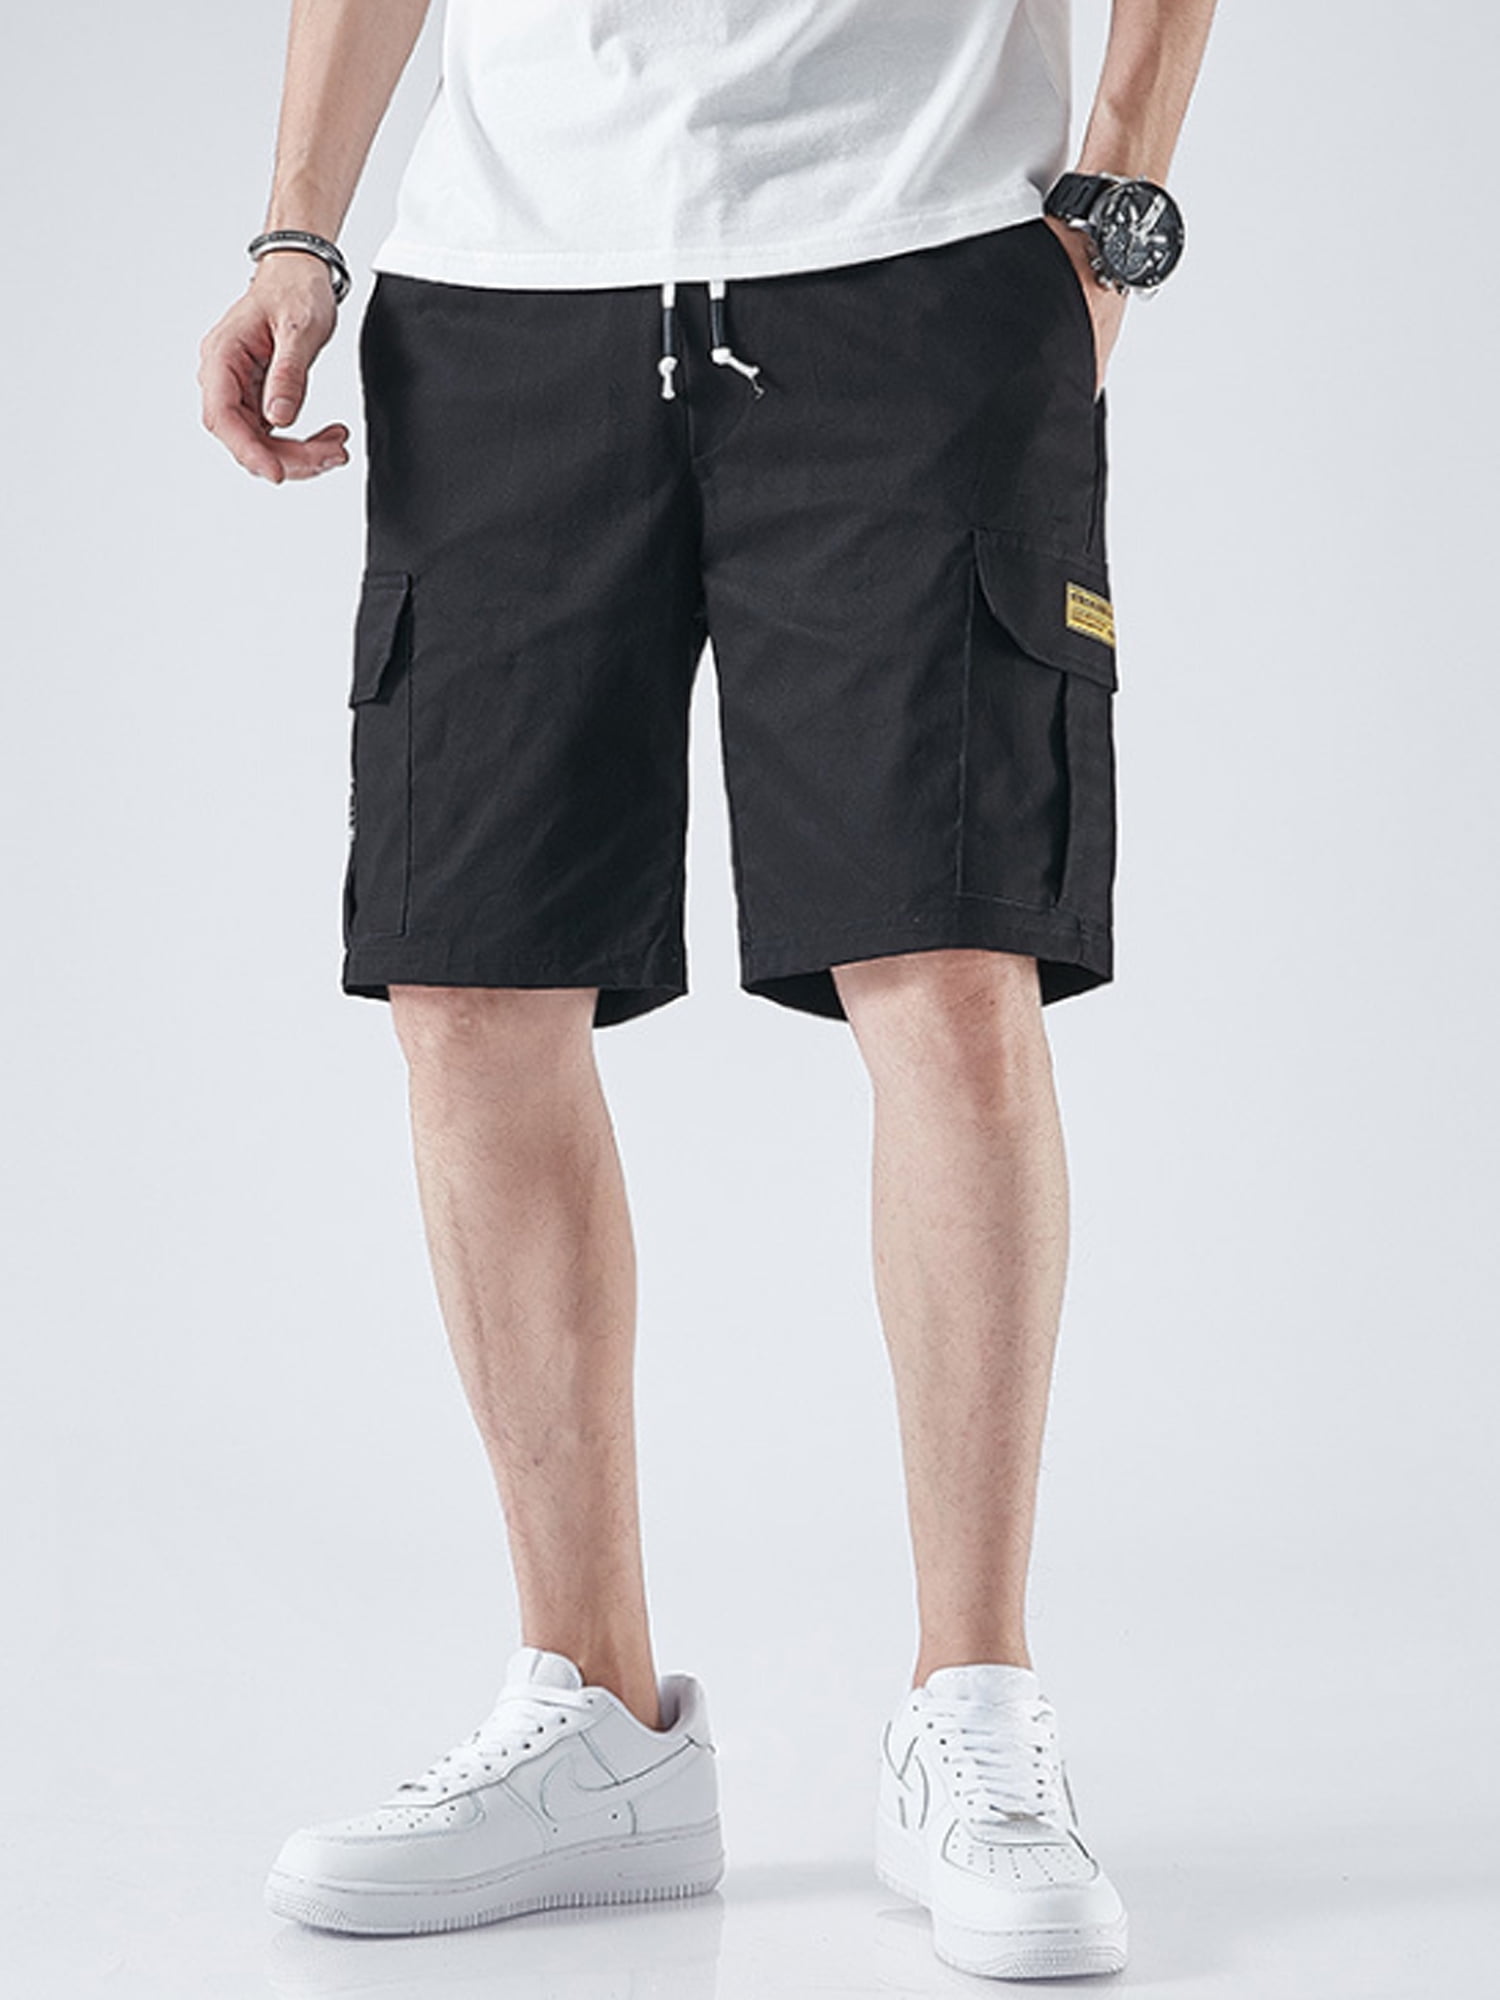 Outdoor Stretch Multi-Pocket Cargo Shorts CQR Mens On-The-Go Cargo Shorts Lightweight Relaxed Fit Casual Shorts